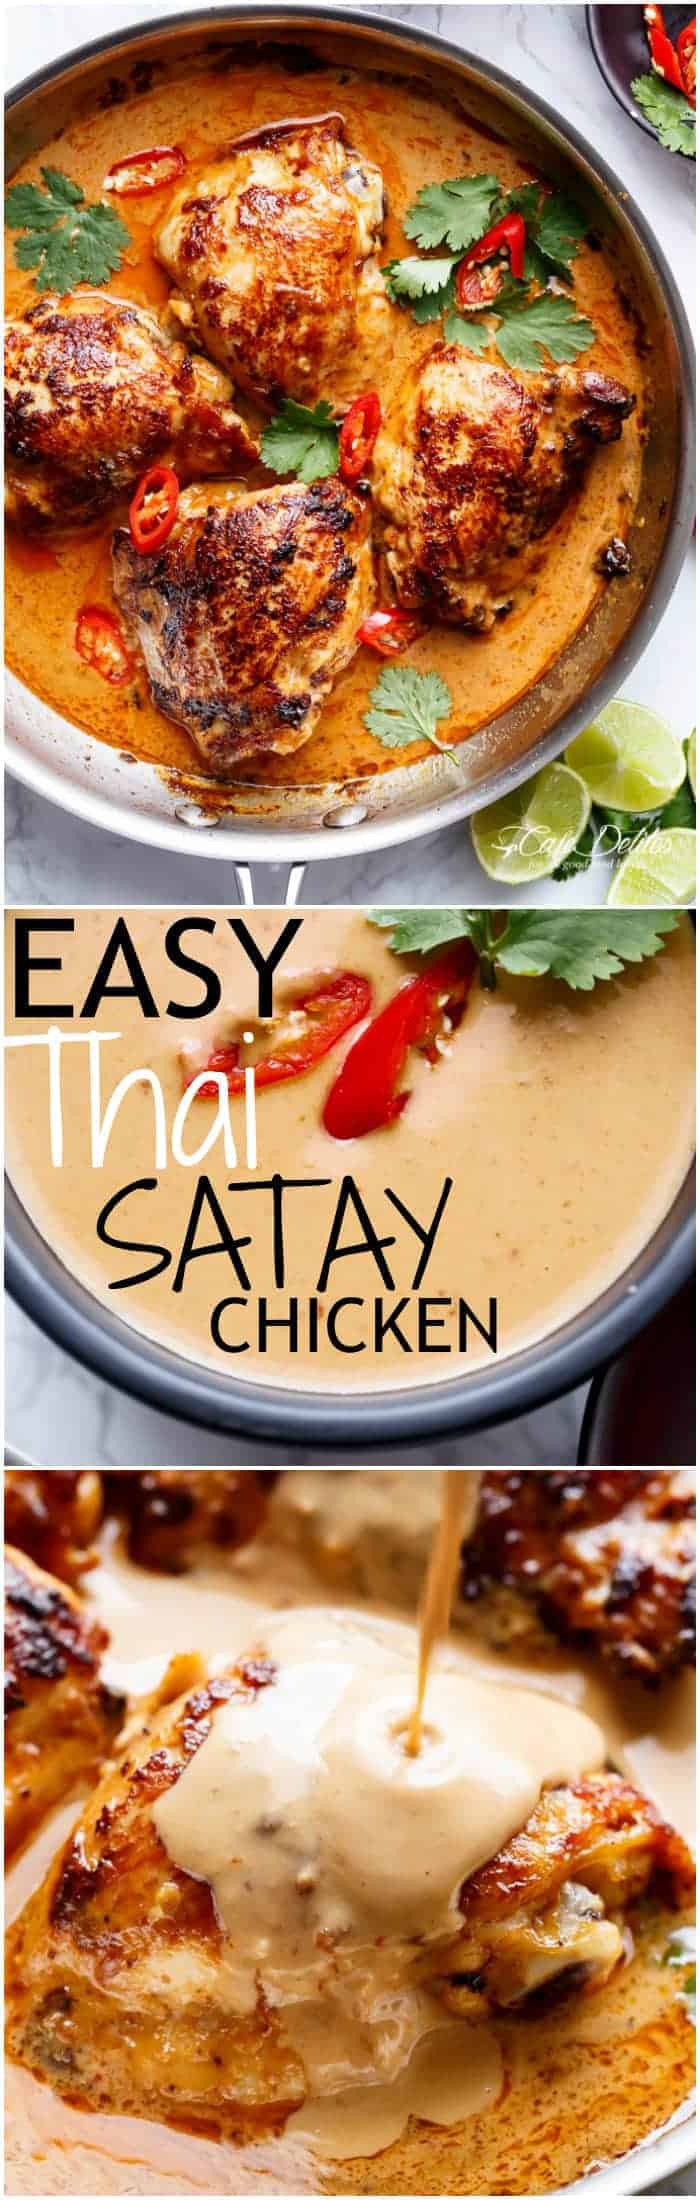 Thai Satay Chicken In A Creamy Peanut Sauce with a special ingredient that makes this satay something spectacular in minutes! | https://cafedelites.com